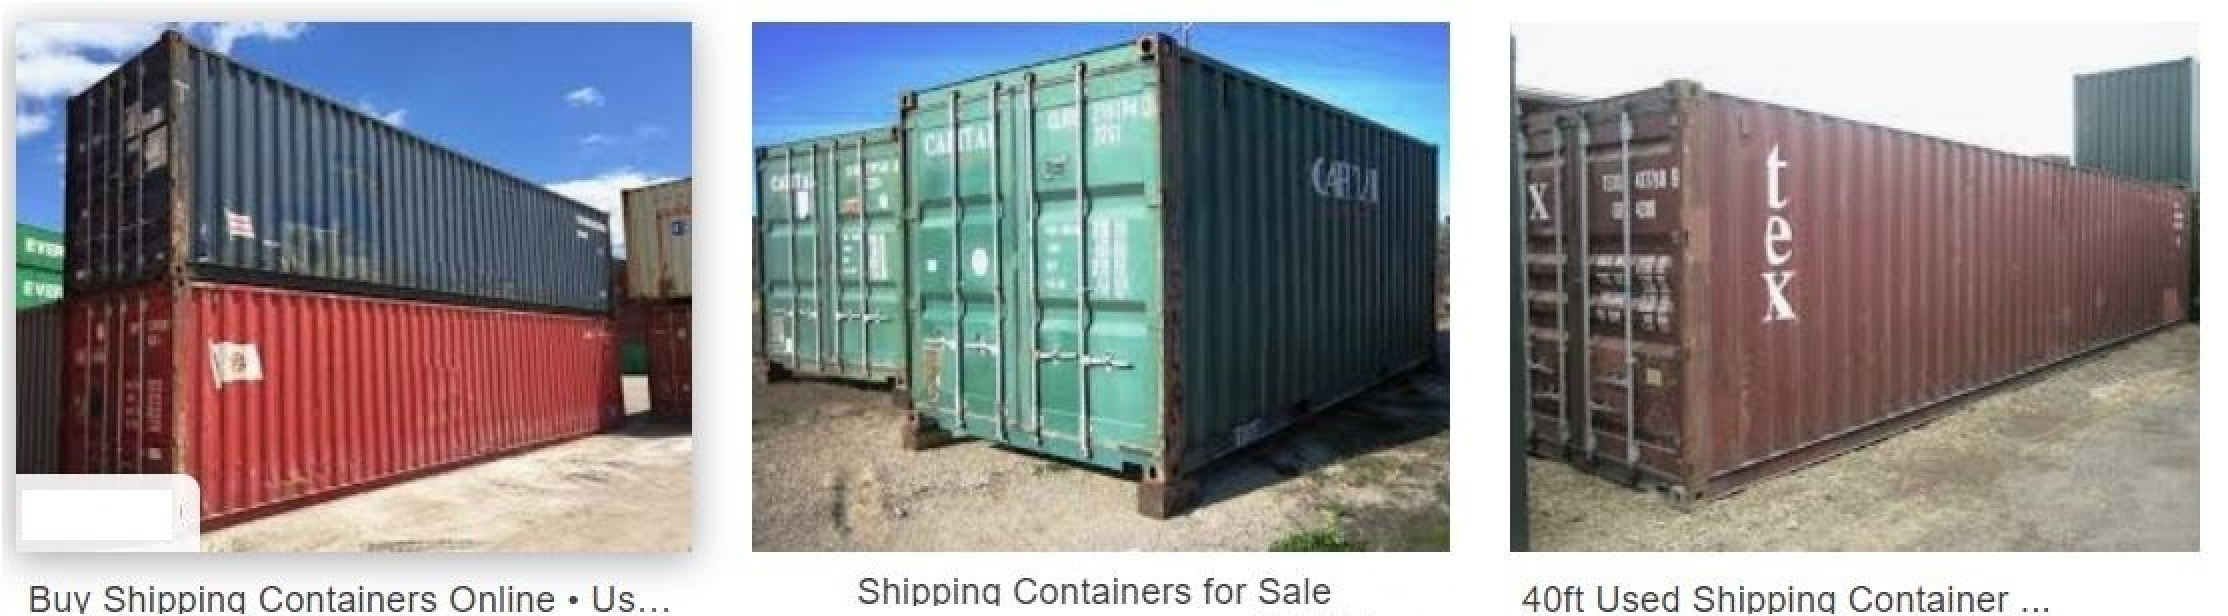 gallery/buy a shipping container1